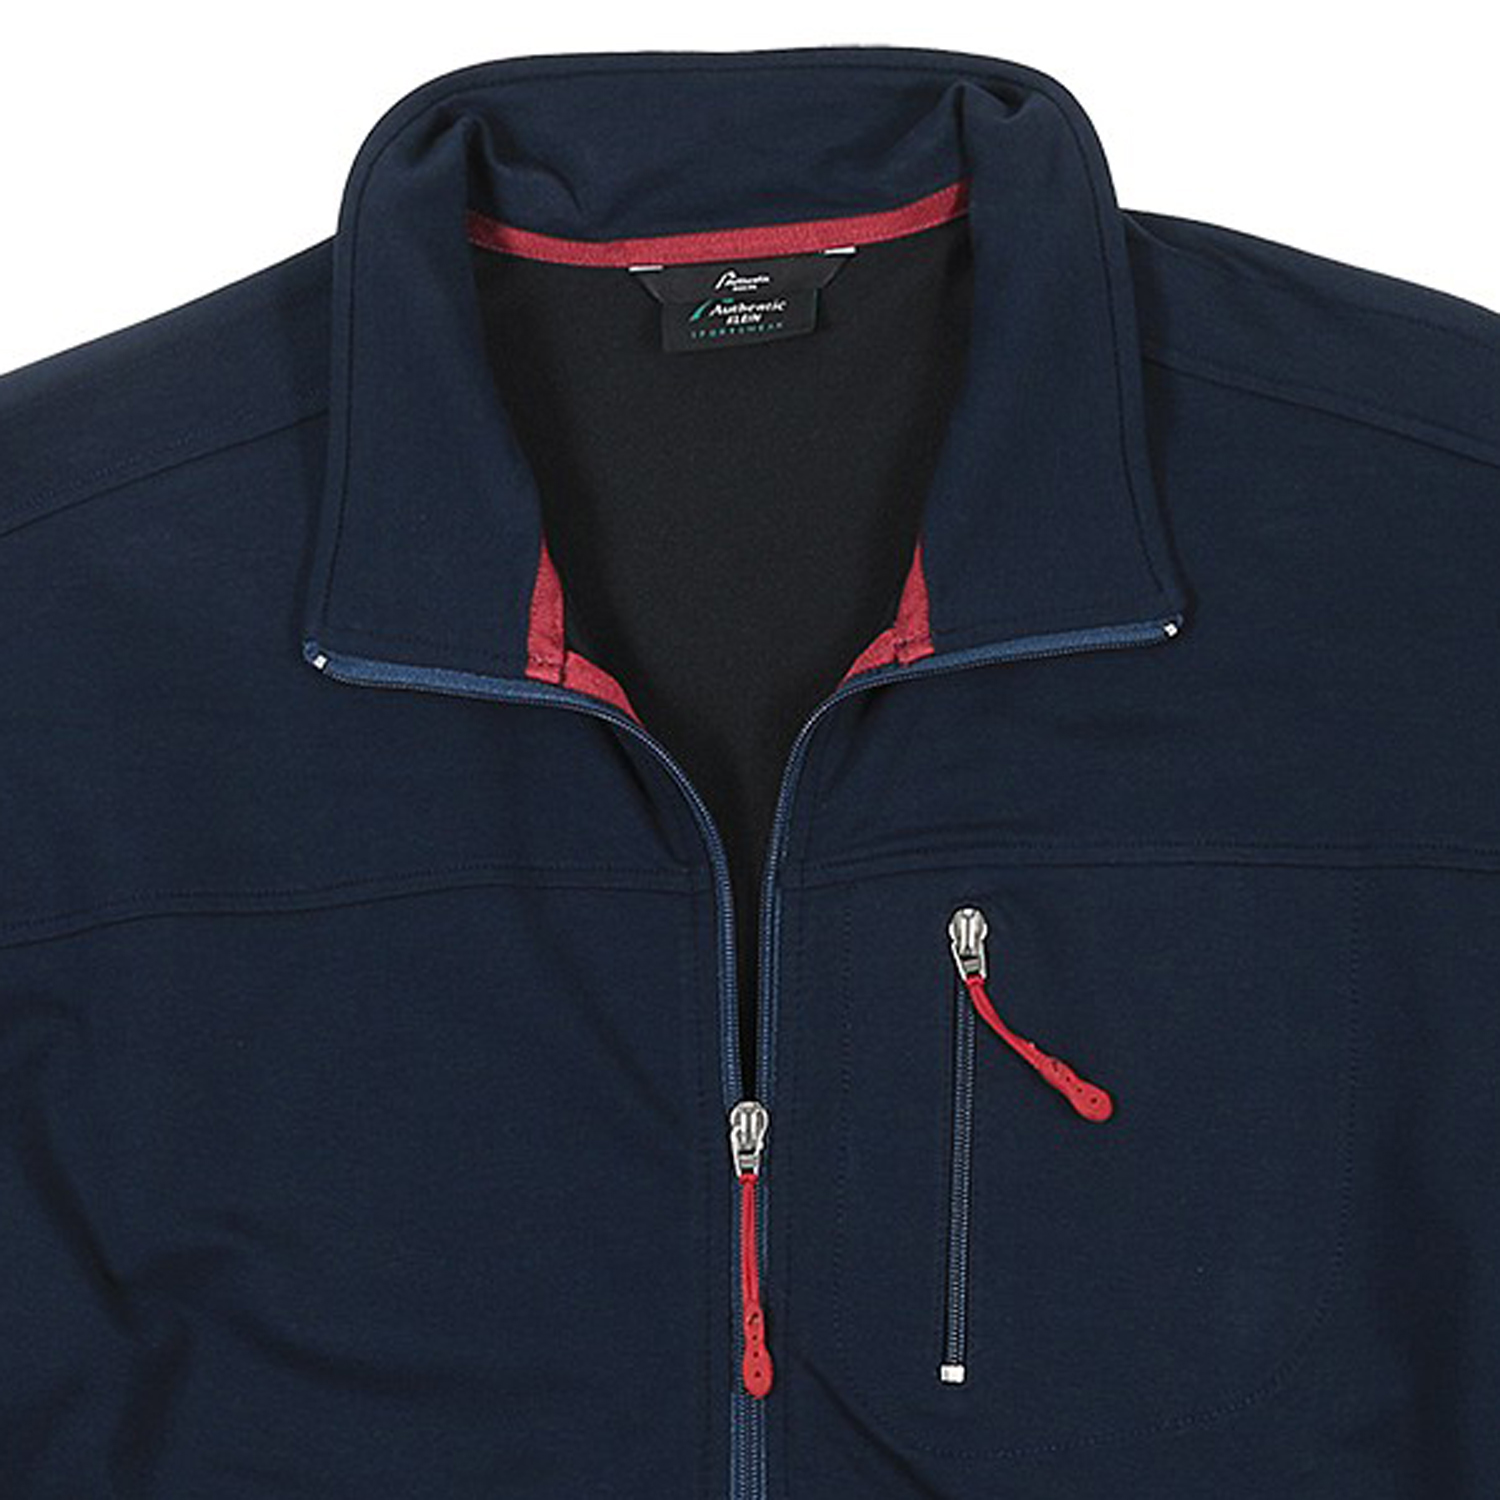 Stocky size sports and leisure jacket in blue, plus sizes by AUTHENTIC KLEIN